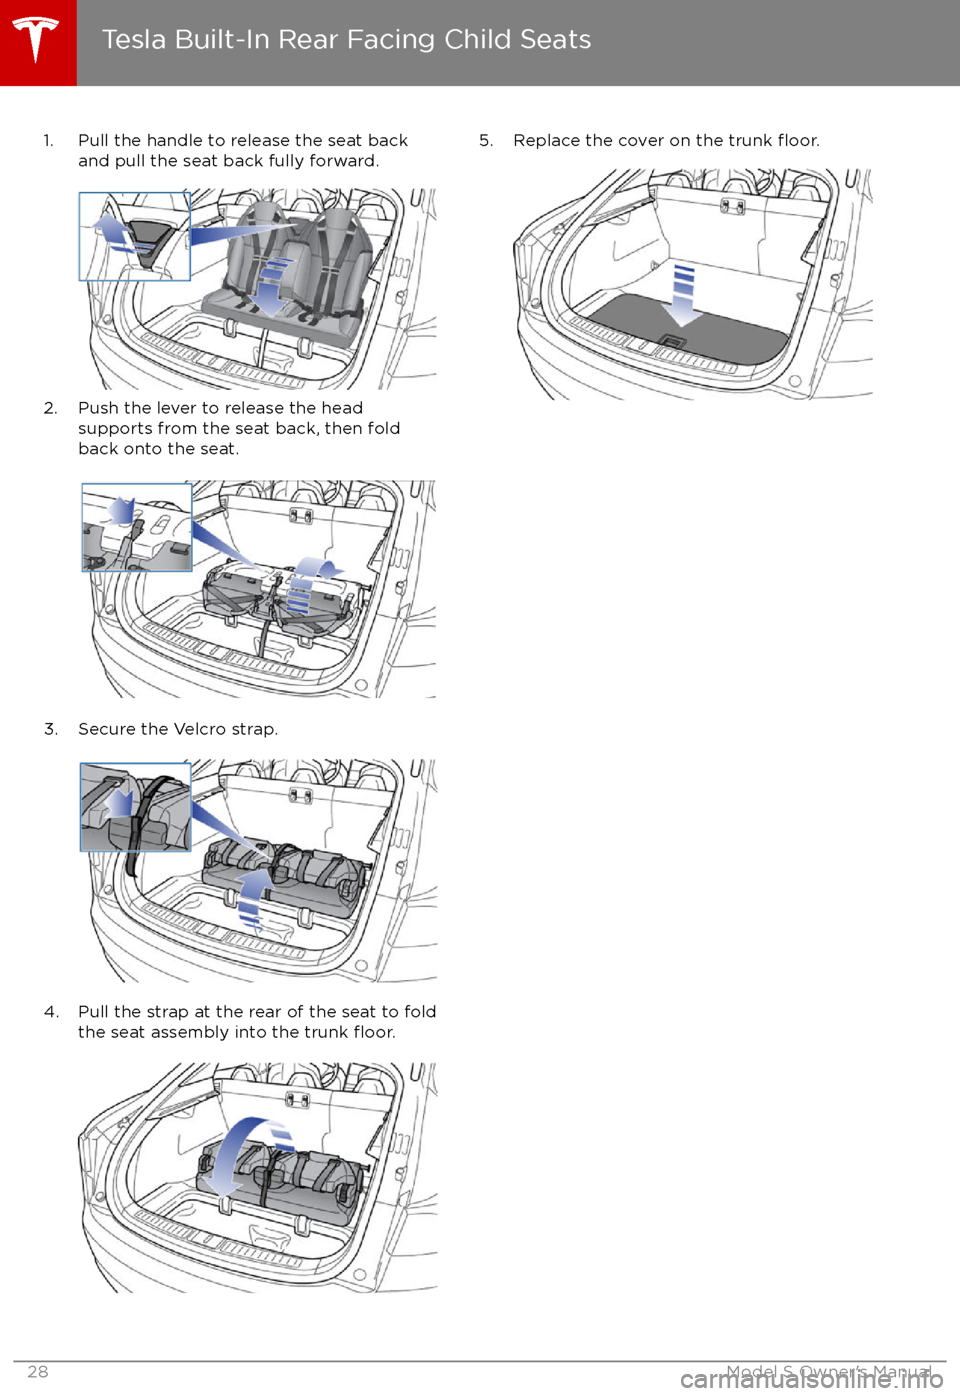 TESLA MODEL S 2017  Owners Manual 1. Pull the handle to release the seat backand pull the seat back fully forward.
2. Push the lever to release the head supports from the seat back, then fold
back onto the seat.
3. Secure the Velcro s